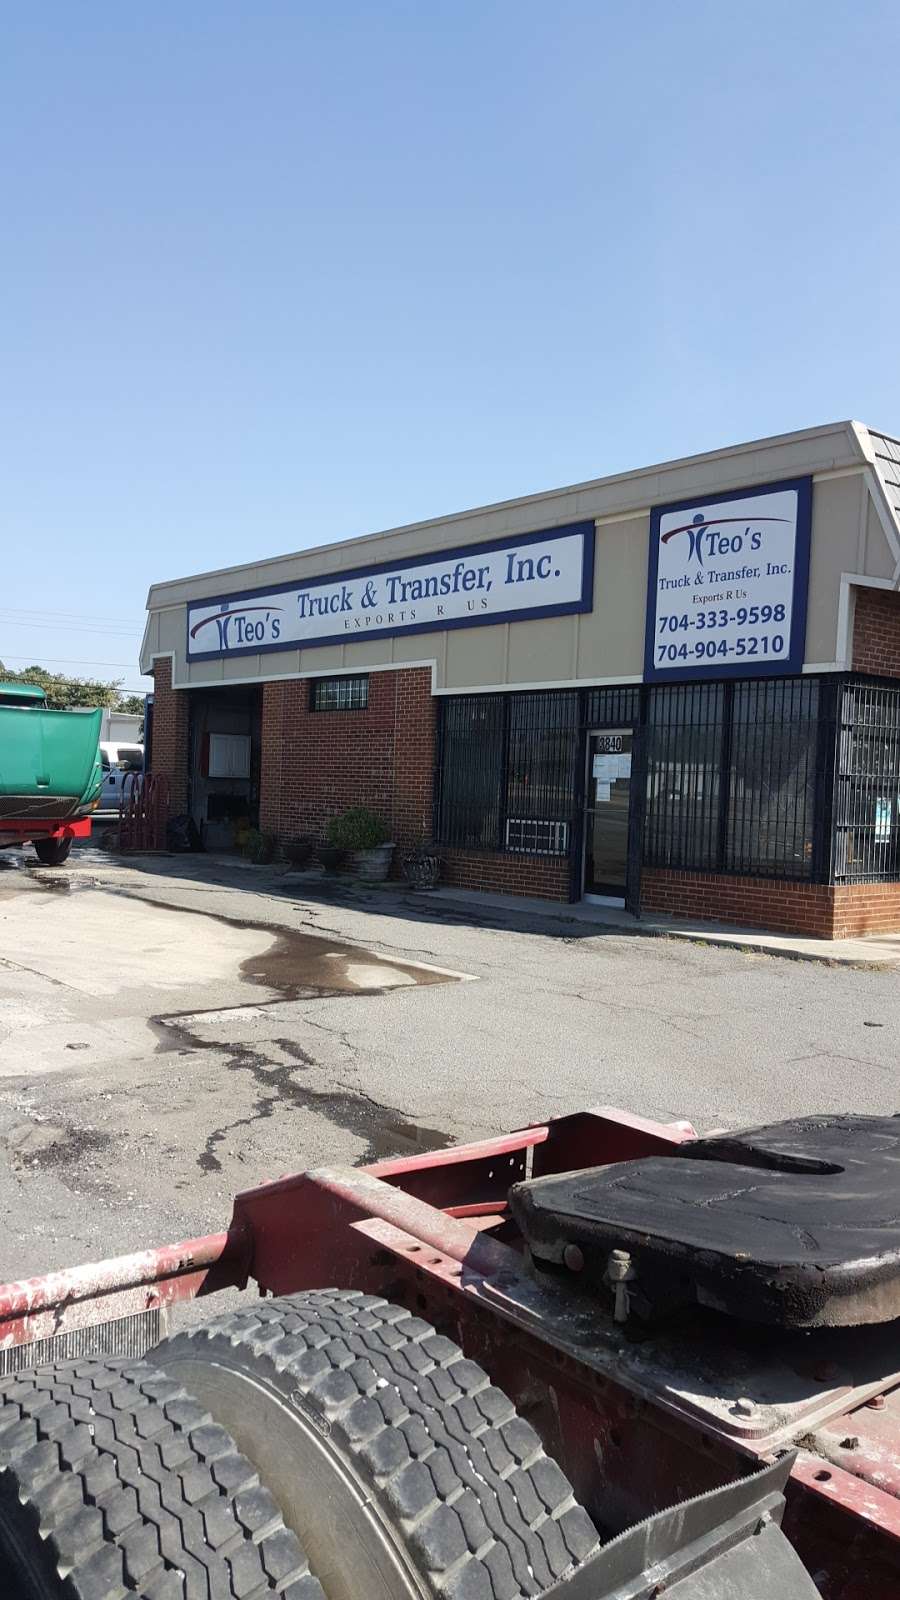 Teos Truck & Transfer Inc | 3840 Statesville Ave, Charlotte, NC 28206 | Phone: (704) 333-9598